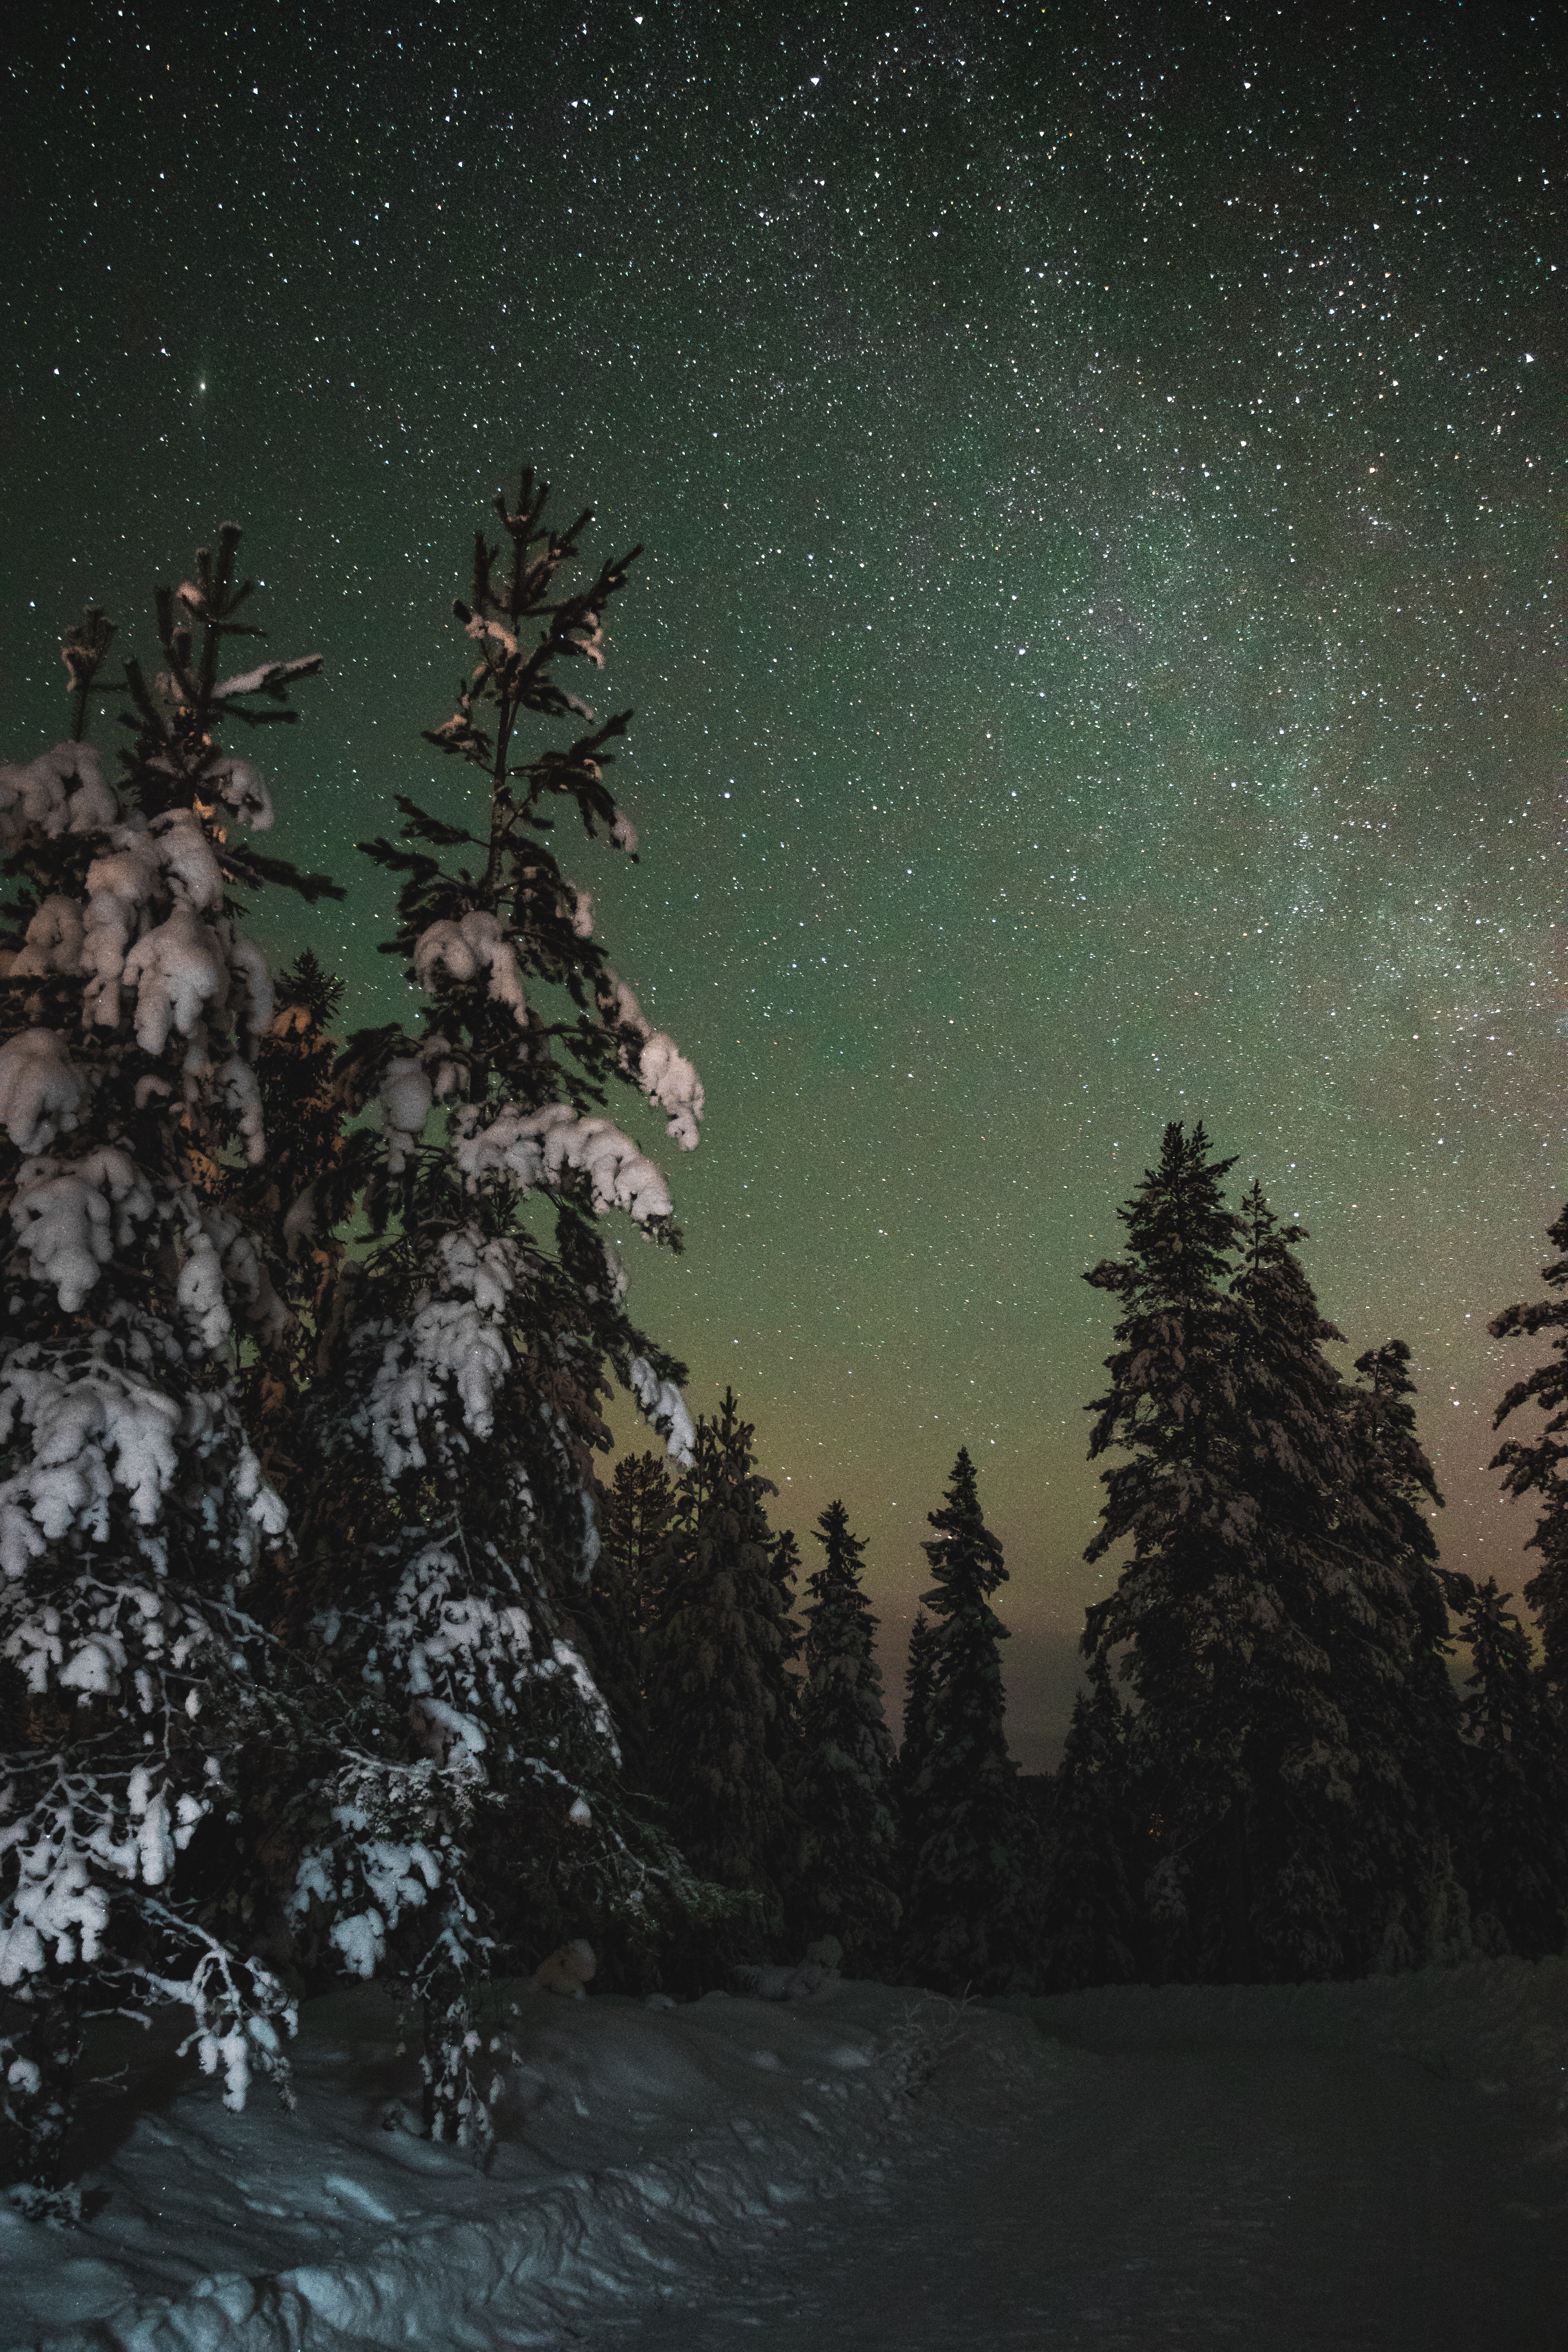 55898 download wallpaper snow, winter, nature, trees, stars, night, starry sky screensavers and pictures for free